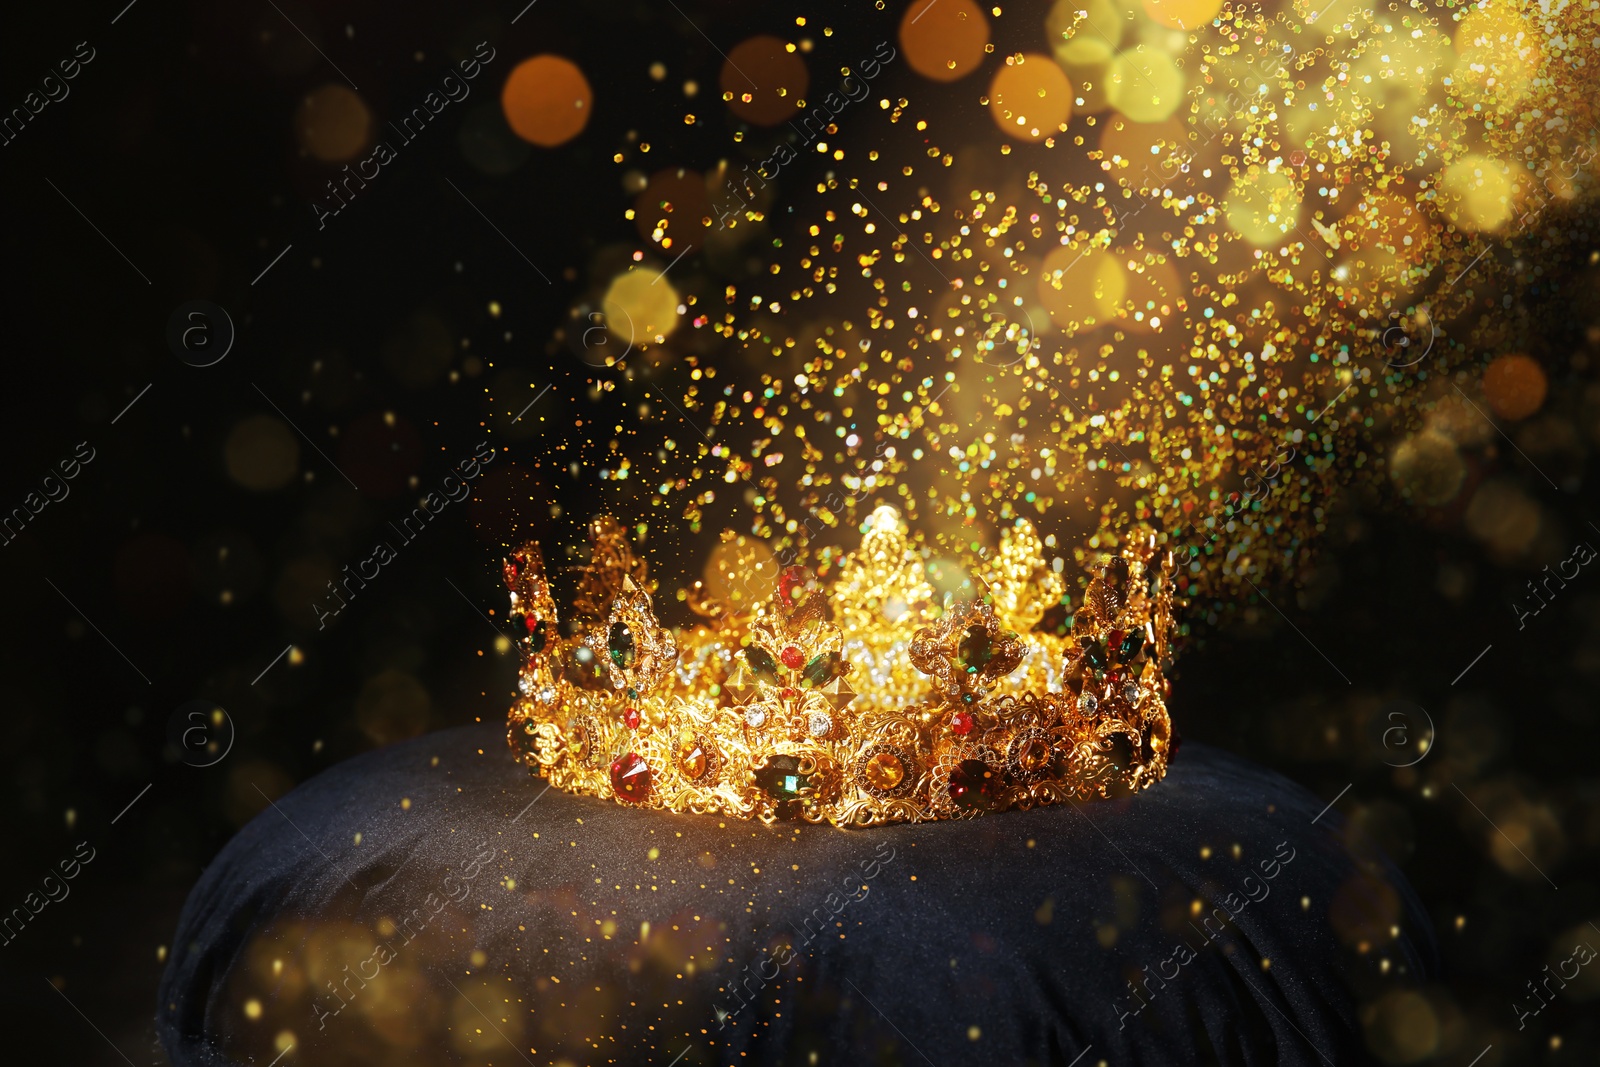 Image of Fantasy world. Beautiful golden crown lit by magic light on pillow